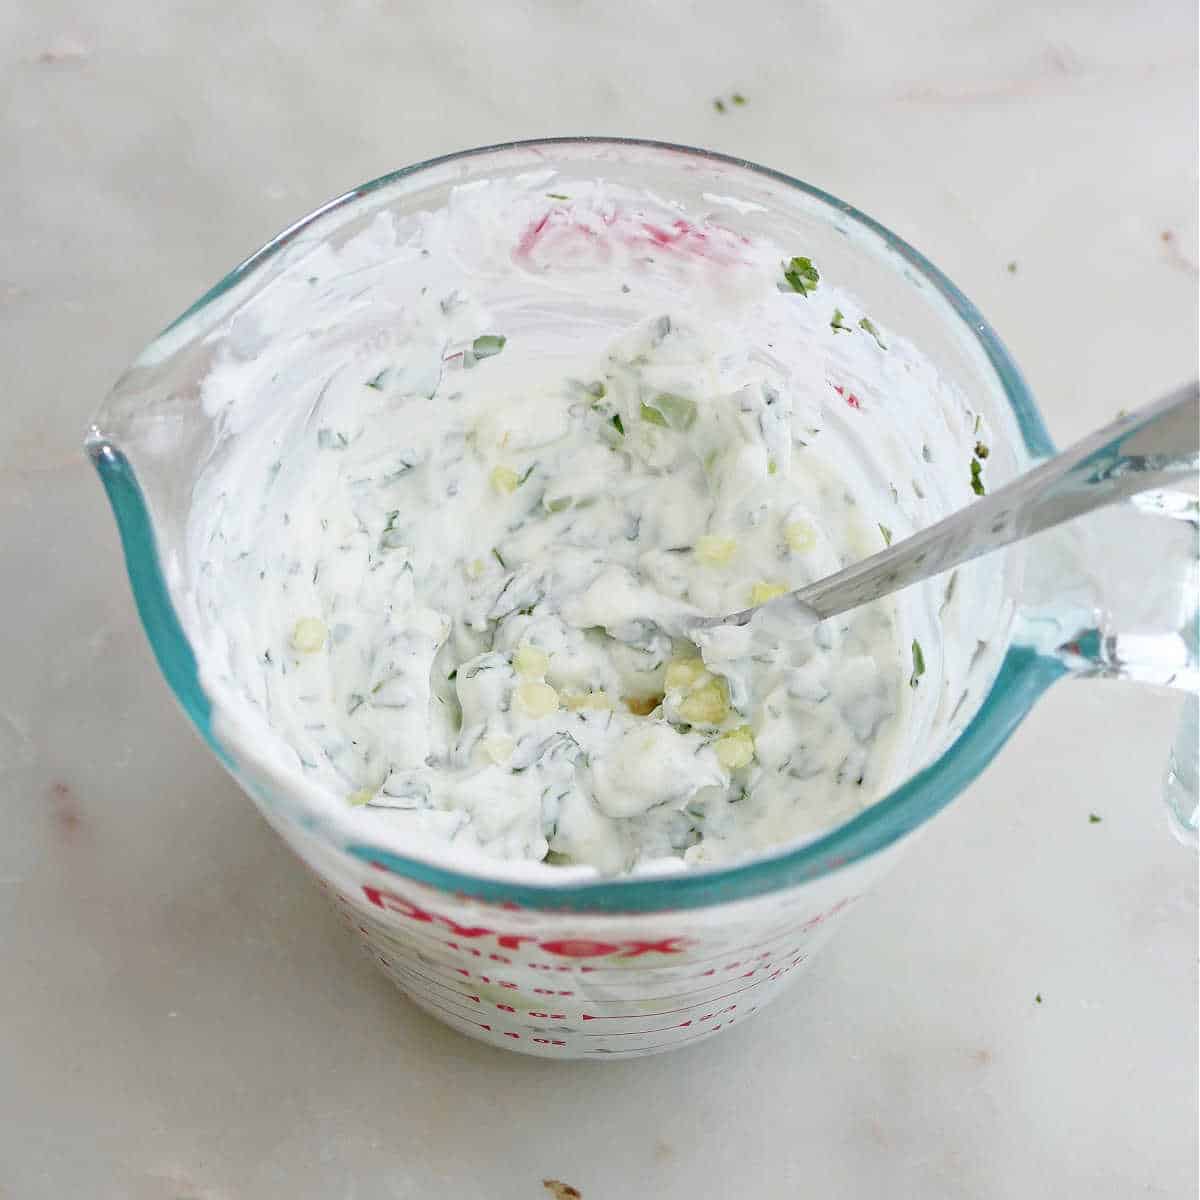 yogurt being mixed with herbs, garlic, and lemon juice in a measuring cup